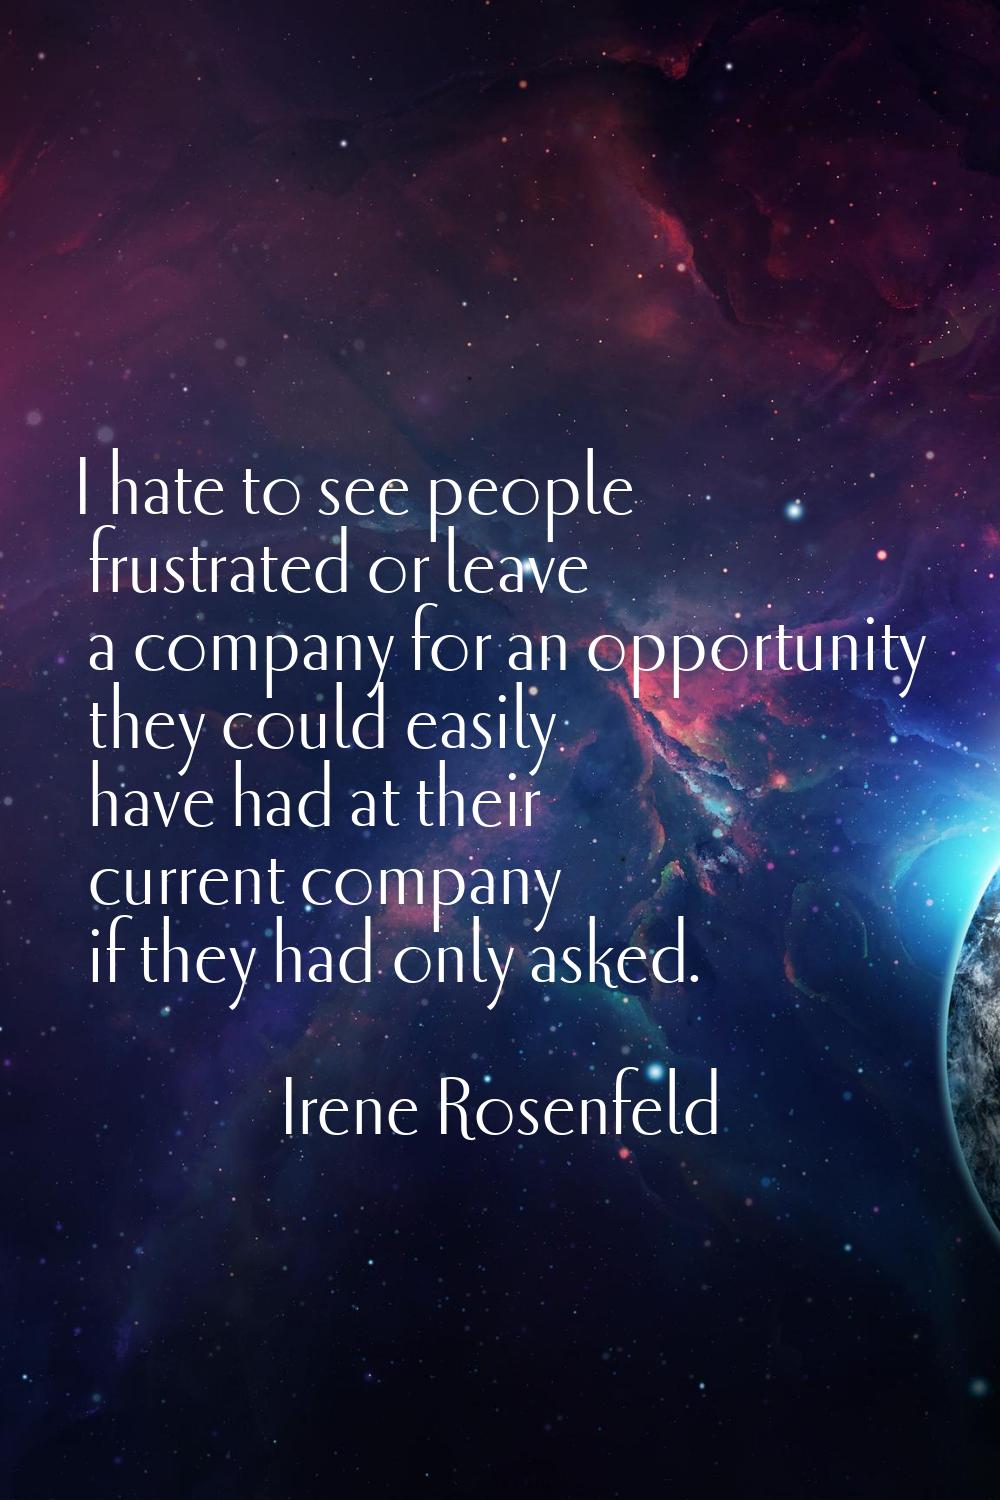 I hate to see people frustrated or leave a company for an opportunity they could easily have had at